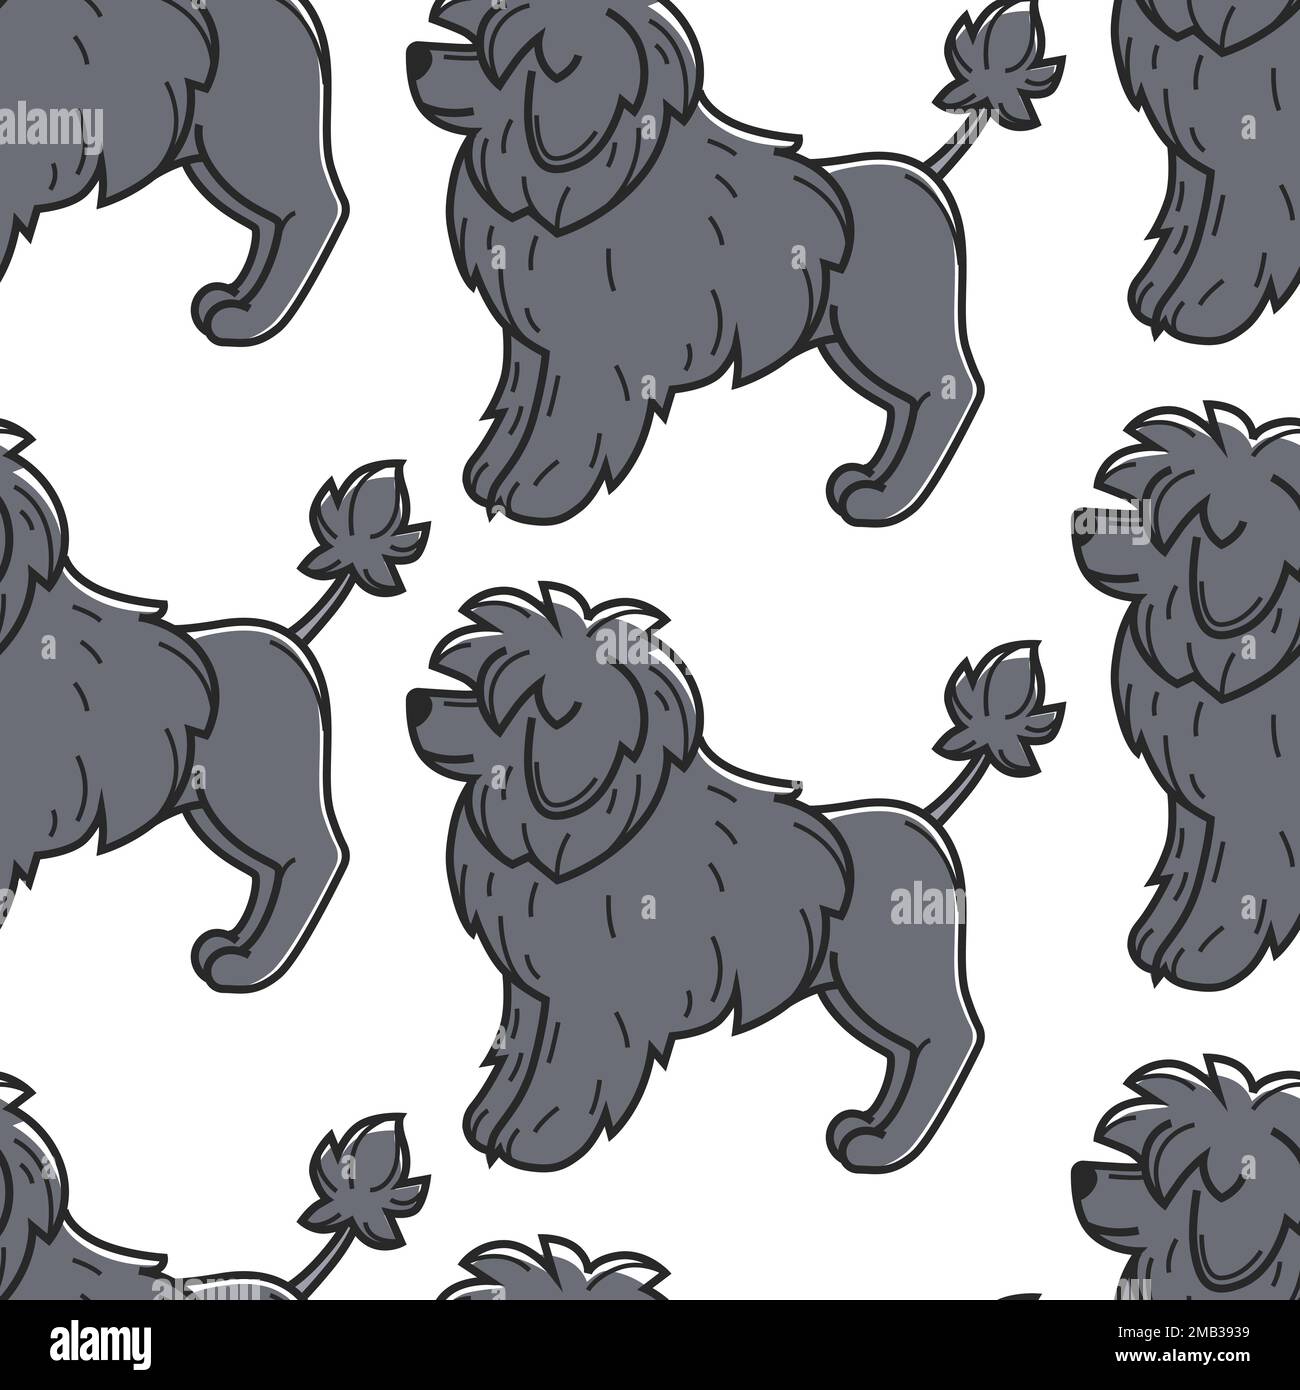 Portuguese Water Dog pet domestic animal seamless pattern Stock Vector